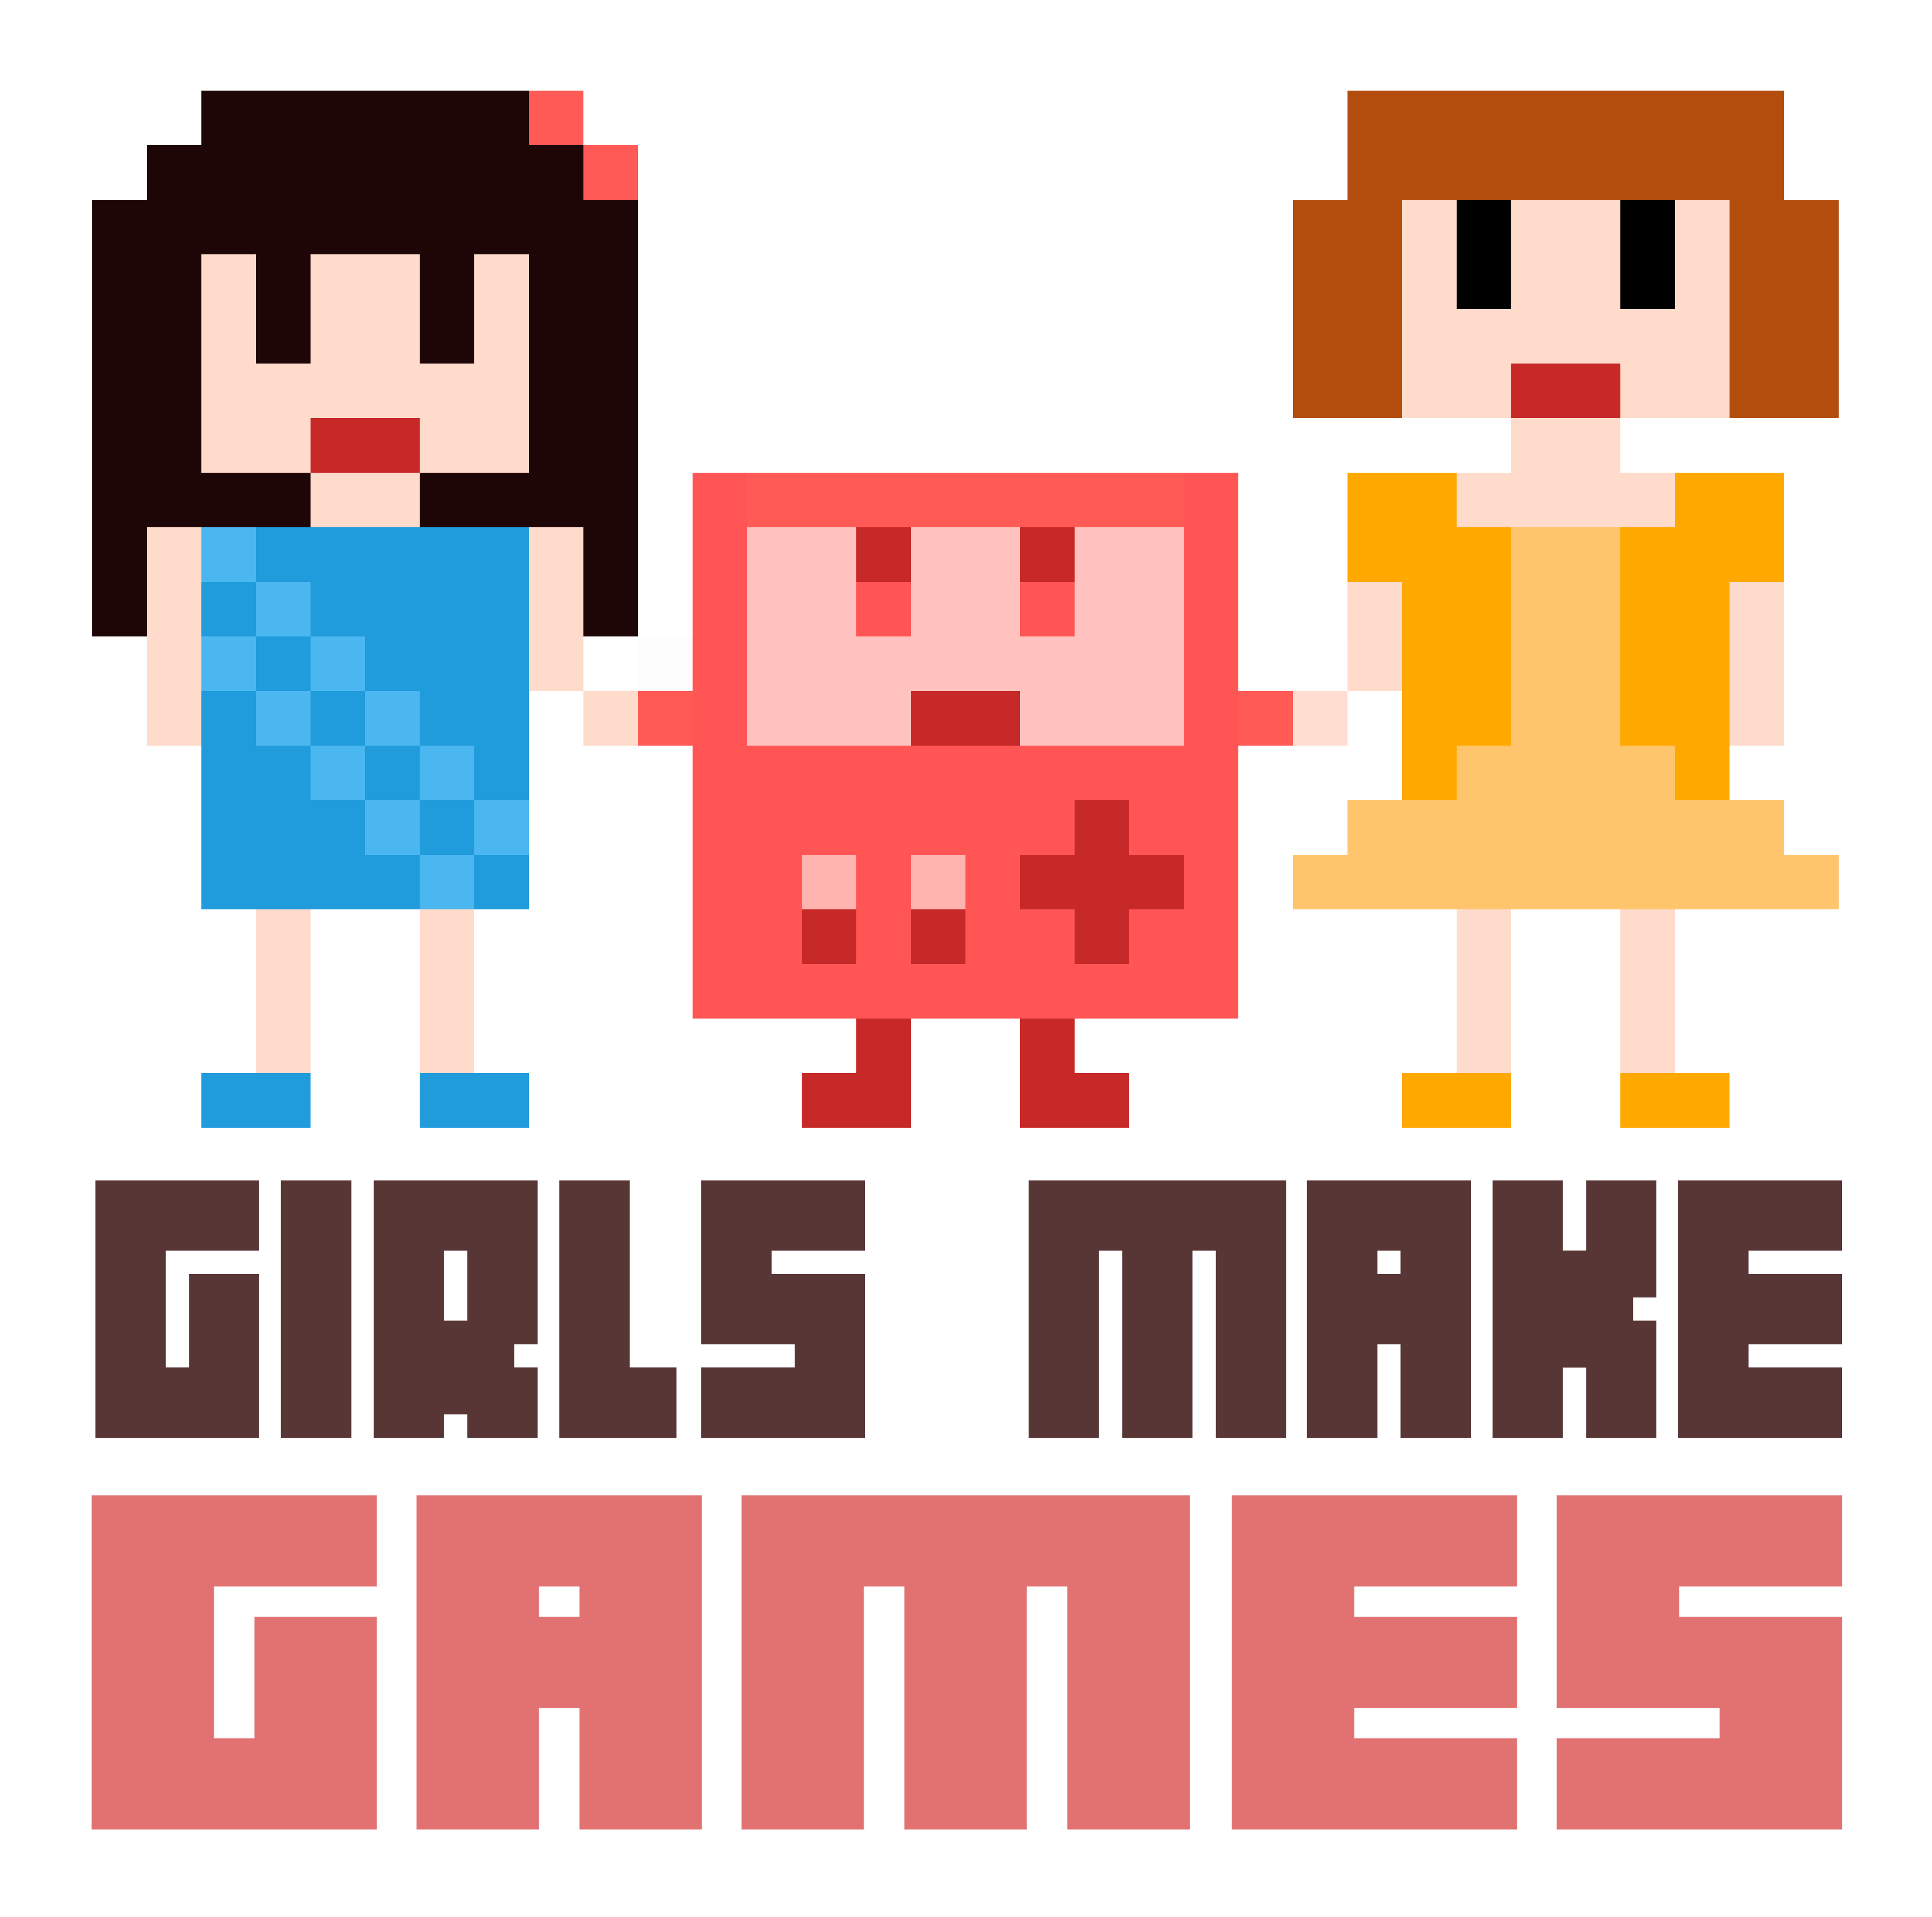 Girls Make Games - The Hole Story